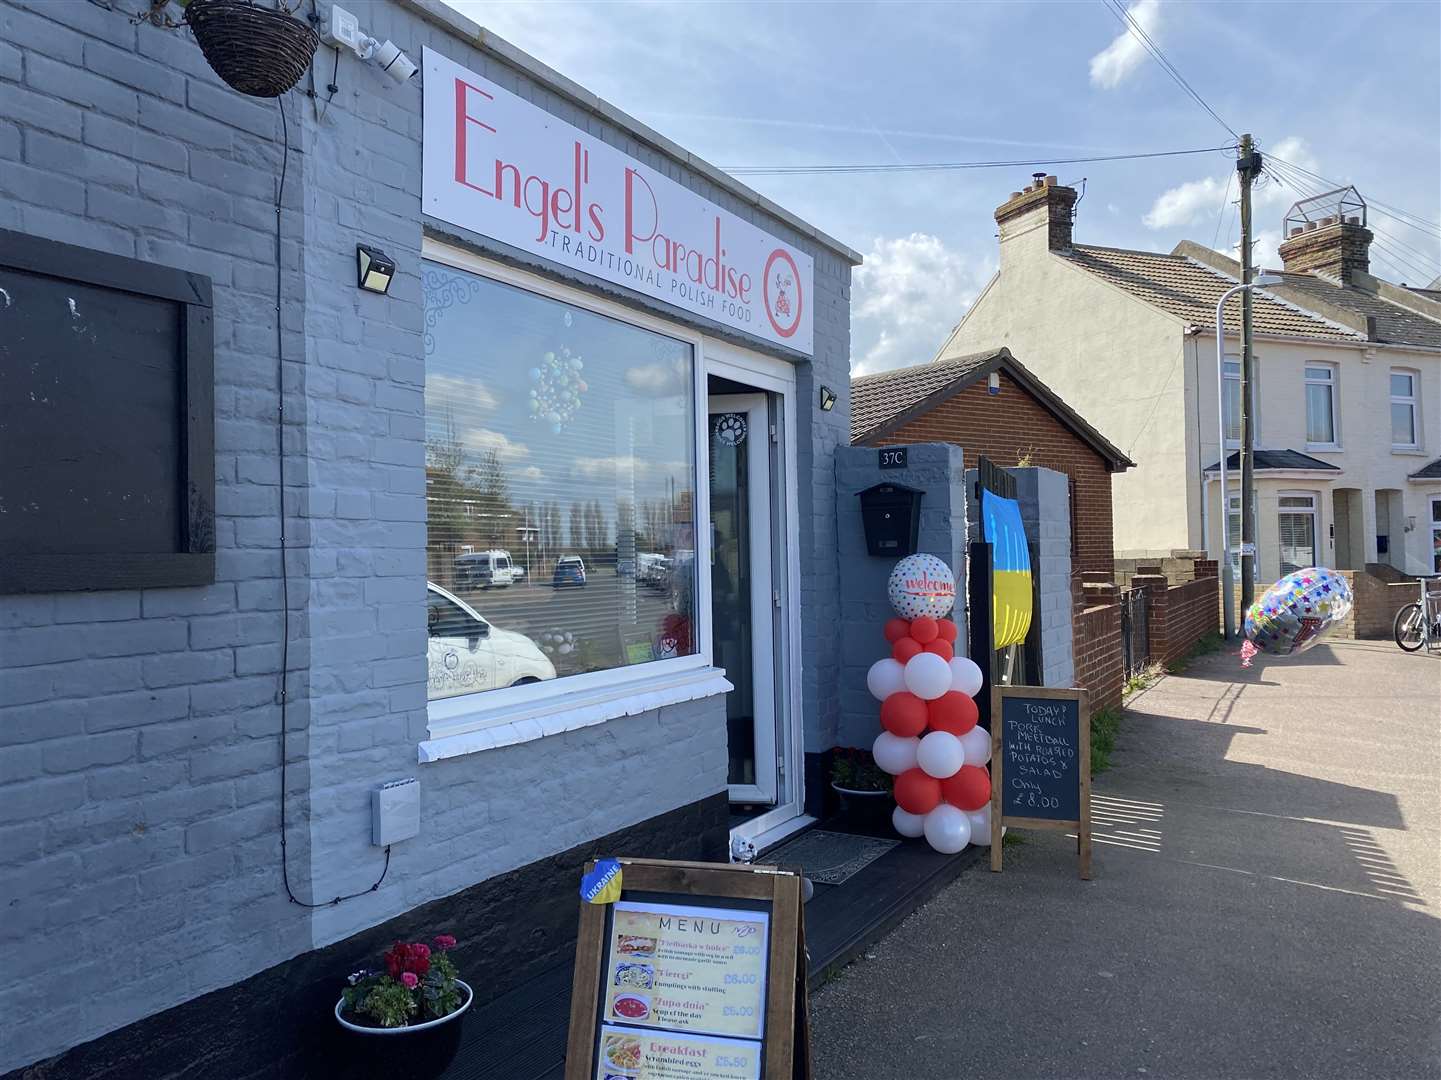 Engel's Paradise has opened in Deal